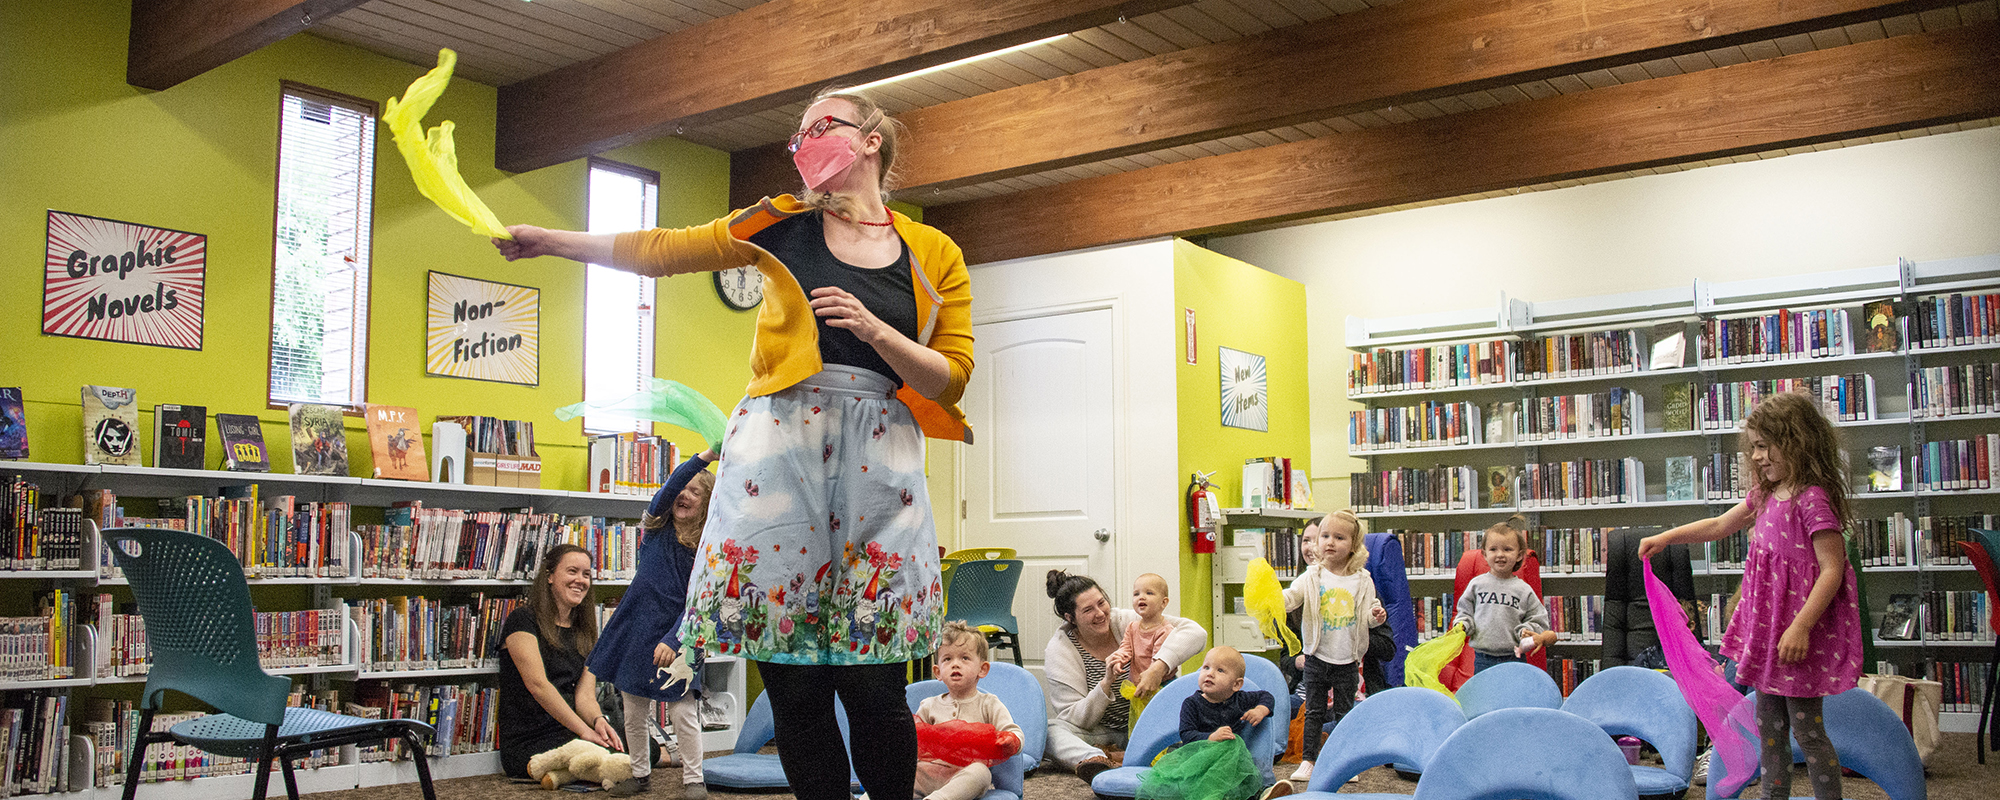 Woman shows kids how to throw scarves and danced at storytime at the gladstone library